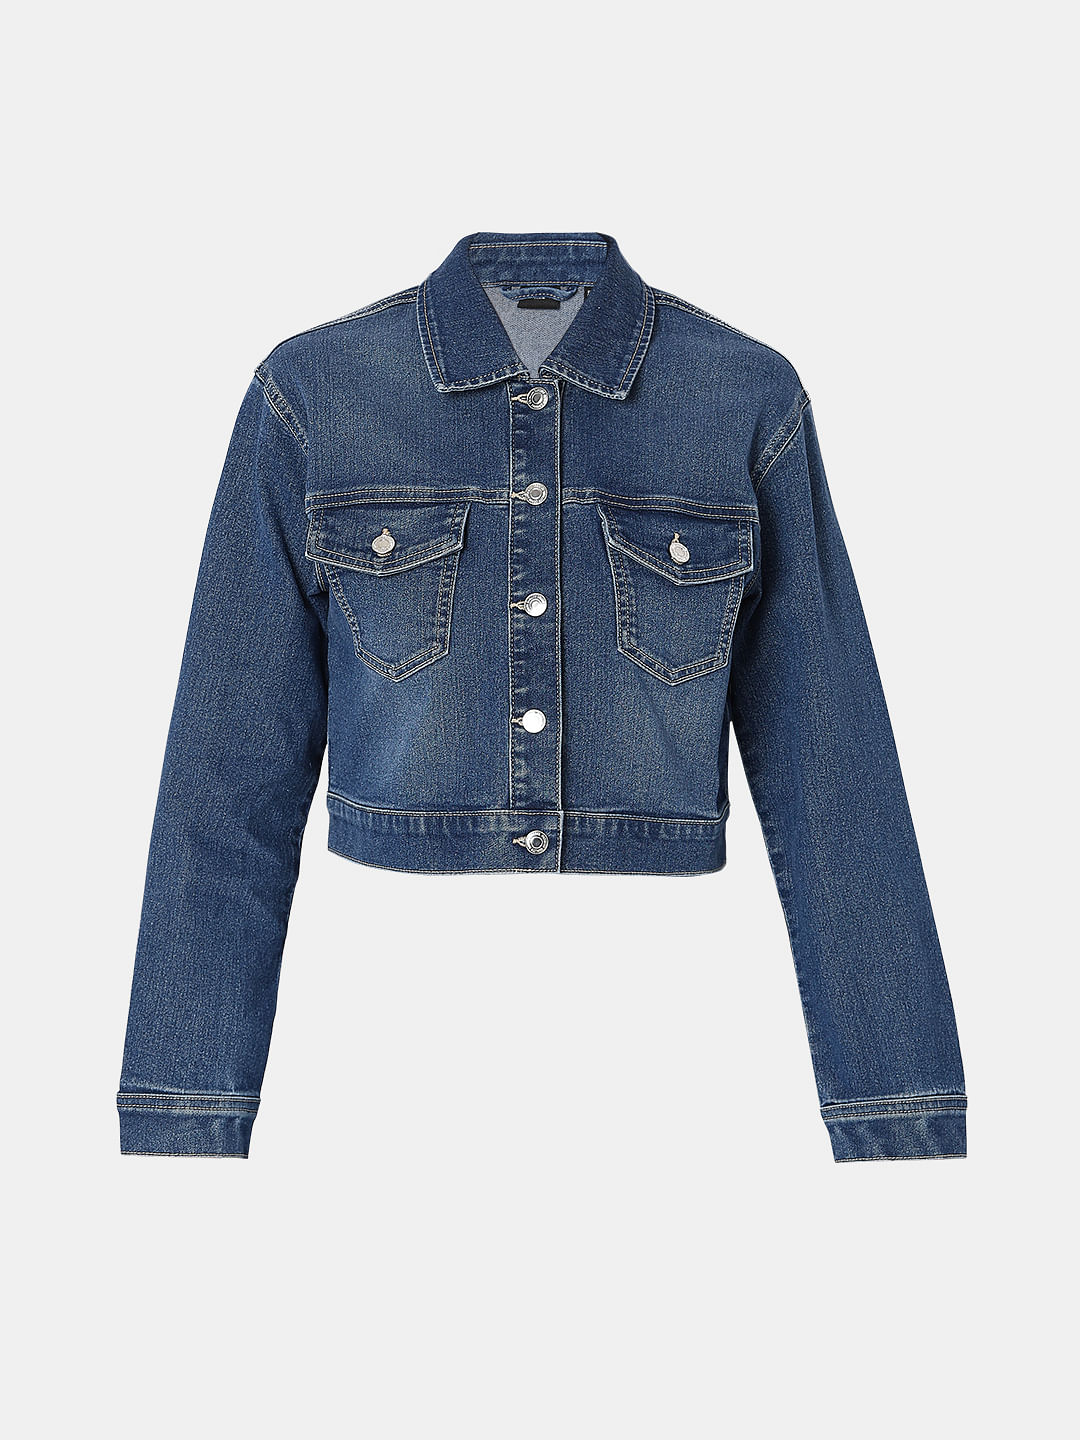 Denim Jackets Worth Adding to Your Closet to Casually Up the Gay |  Autostraddle